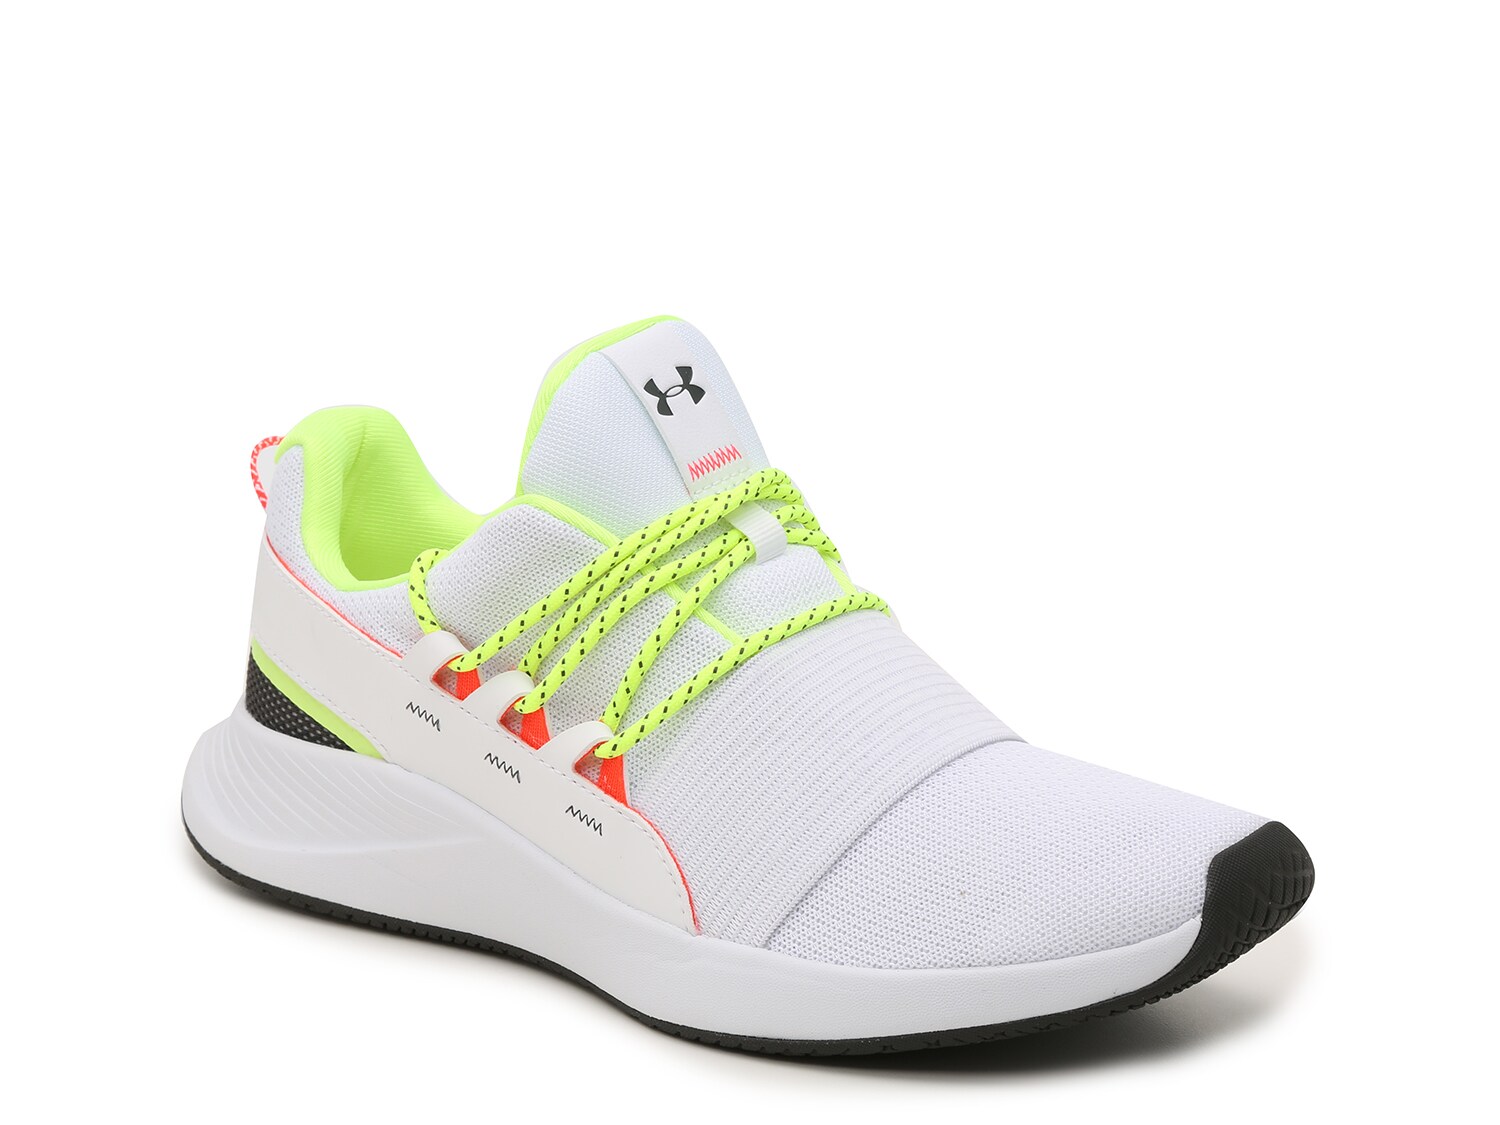 under armour slip on shoes